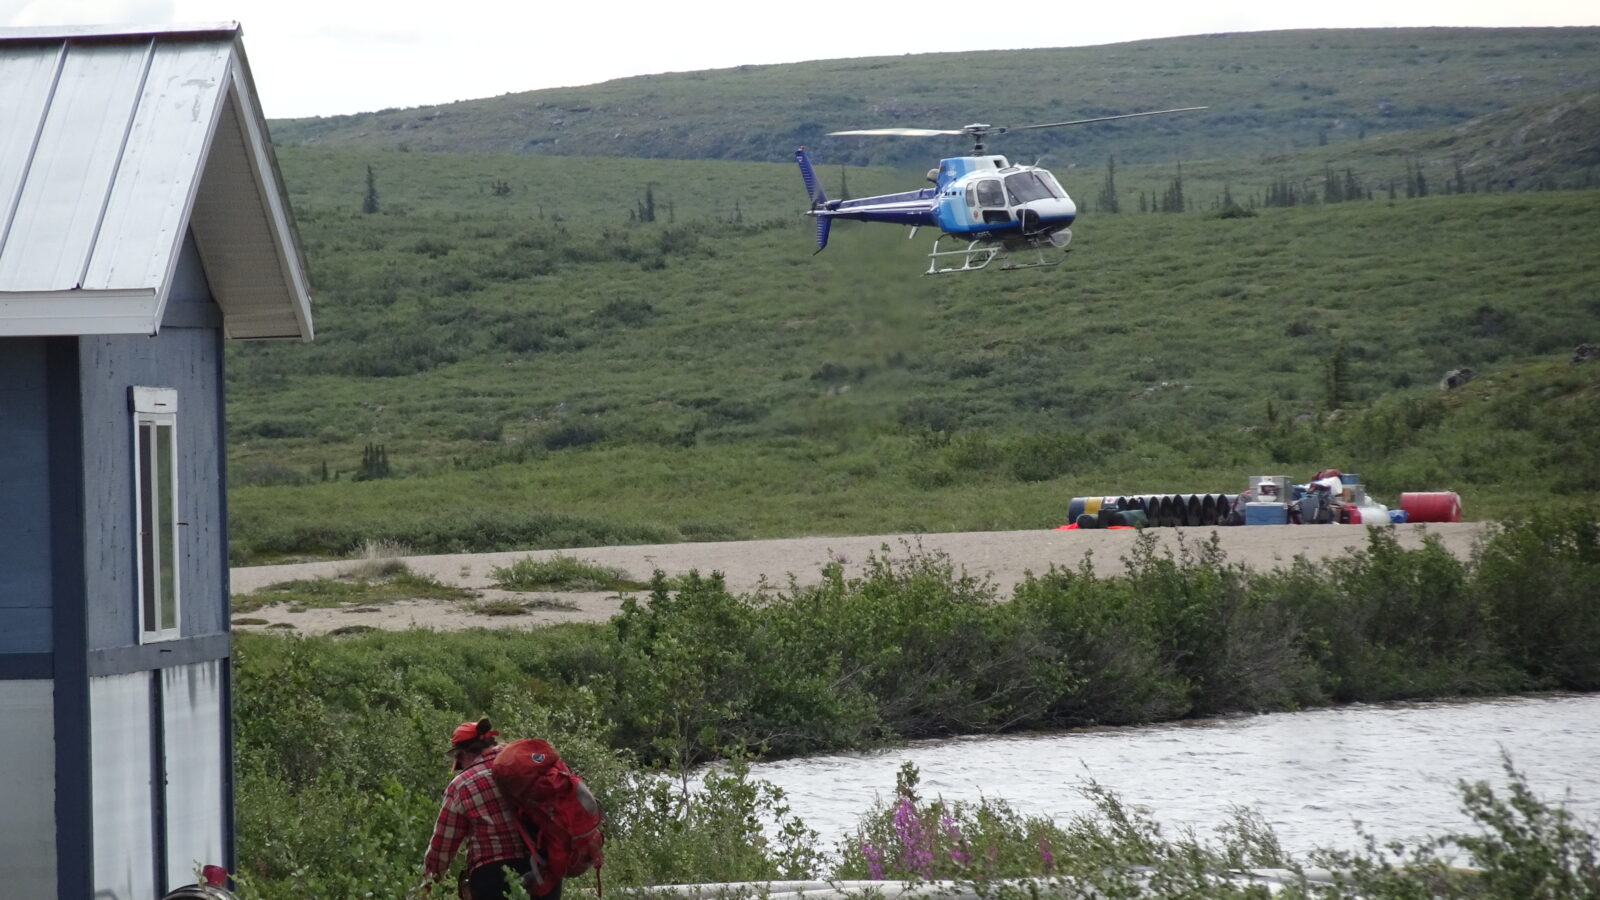 A geologist is walking towards a helicopter hovering above ground in field. Drums on ground.